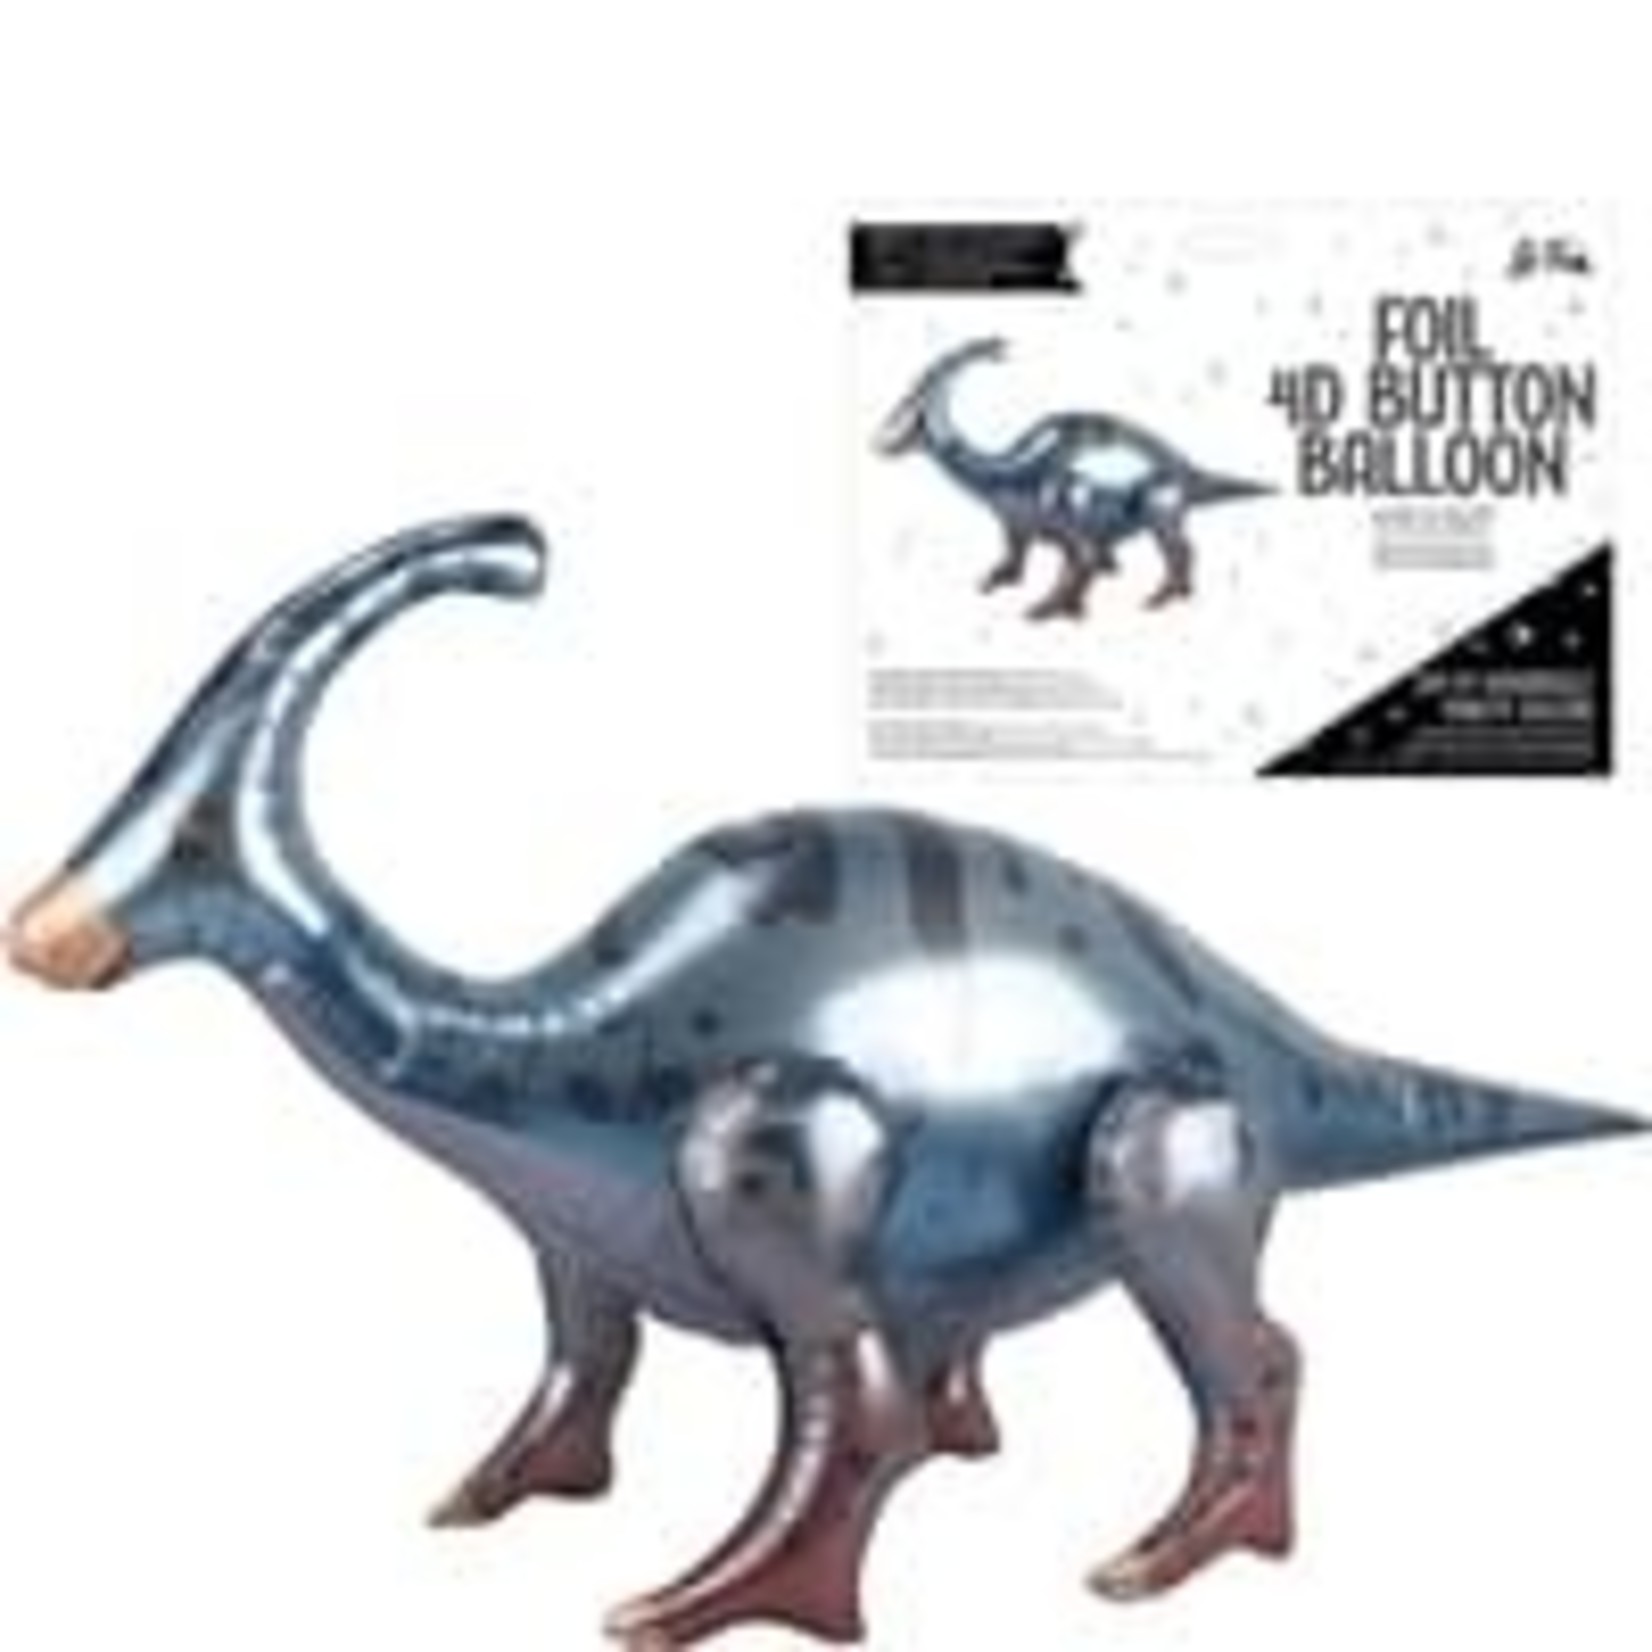 La Fete 43" Duck-Billed Dinosaur 4D Balloon - 1ct. (Air-Filled Only)